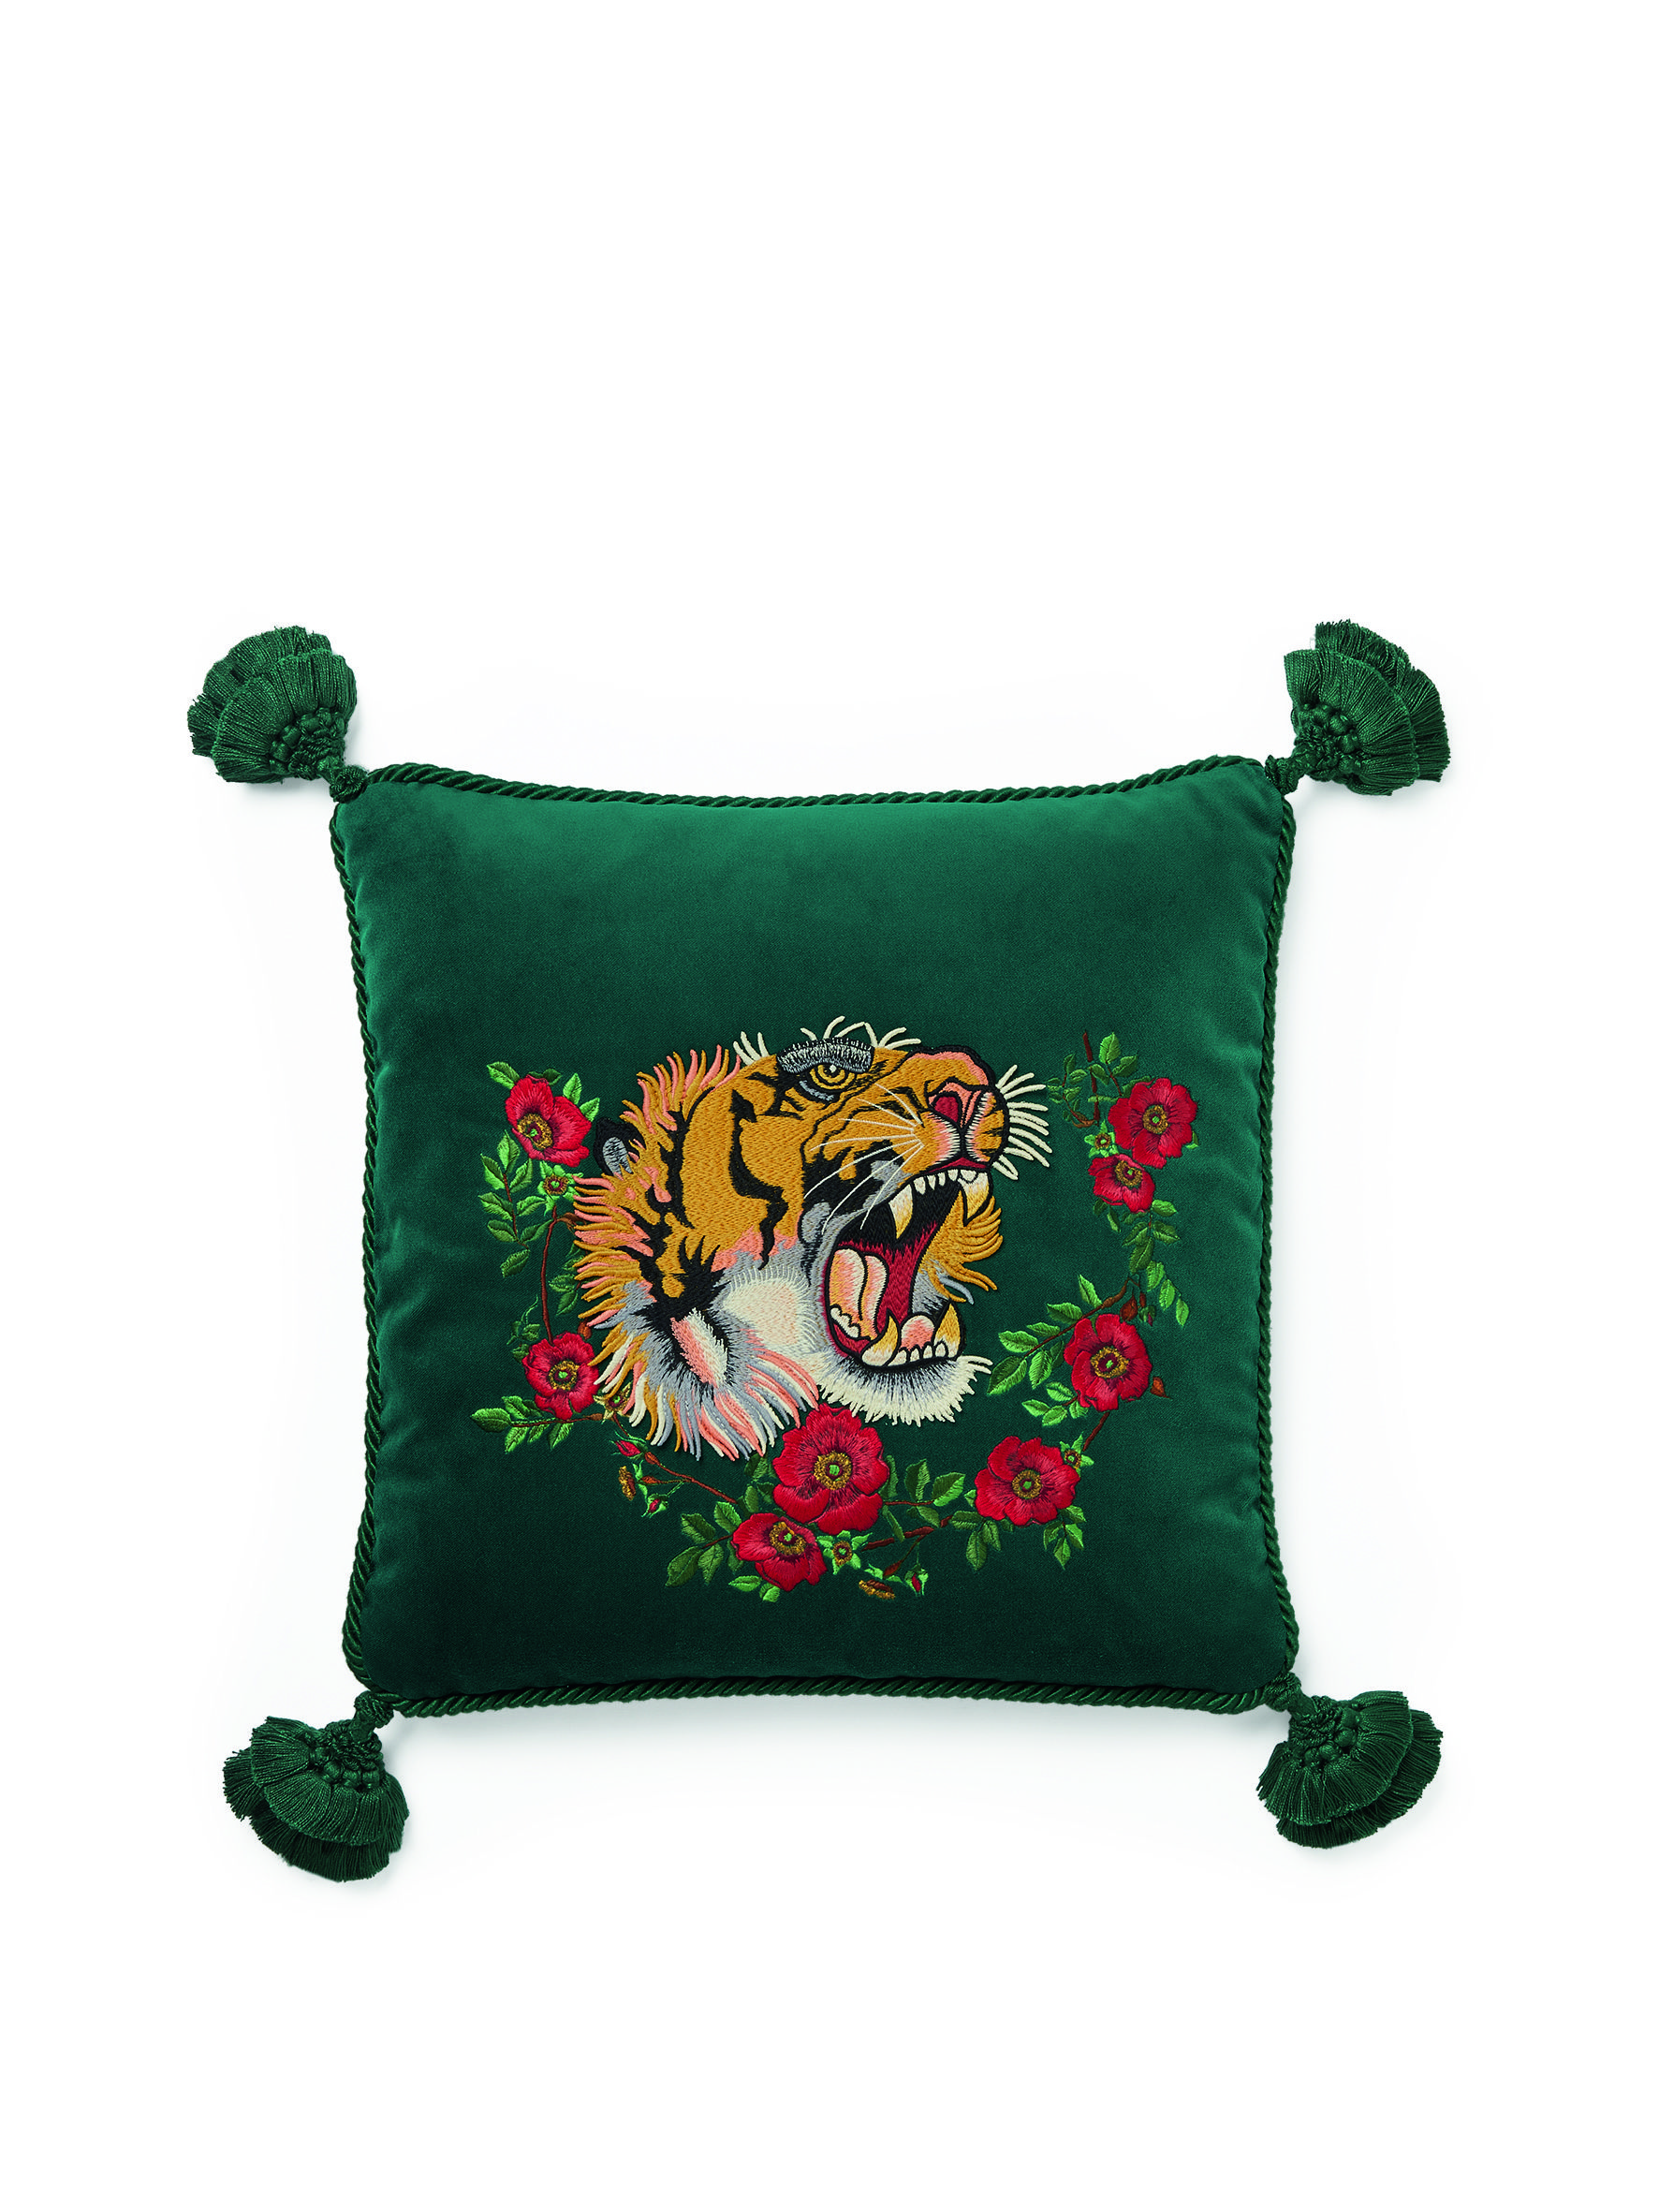 Gucci Is Launching Their First Home Collection - Gucci Decor